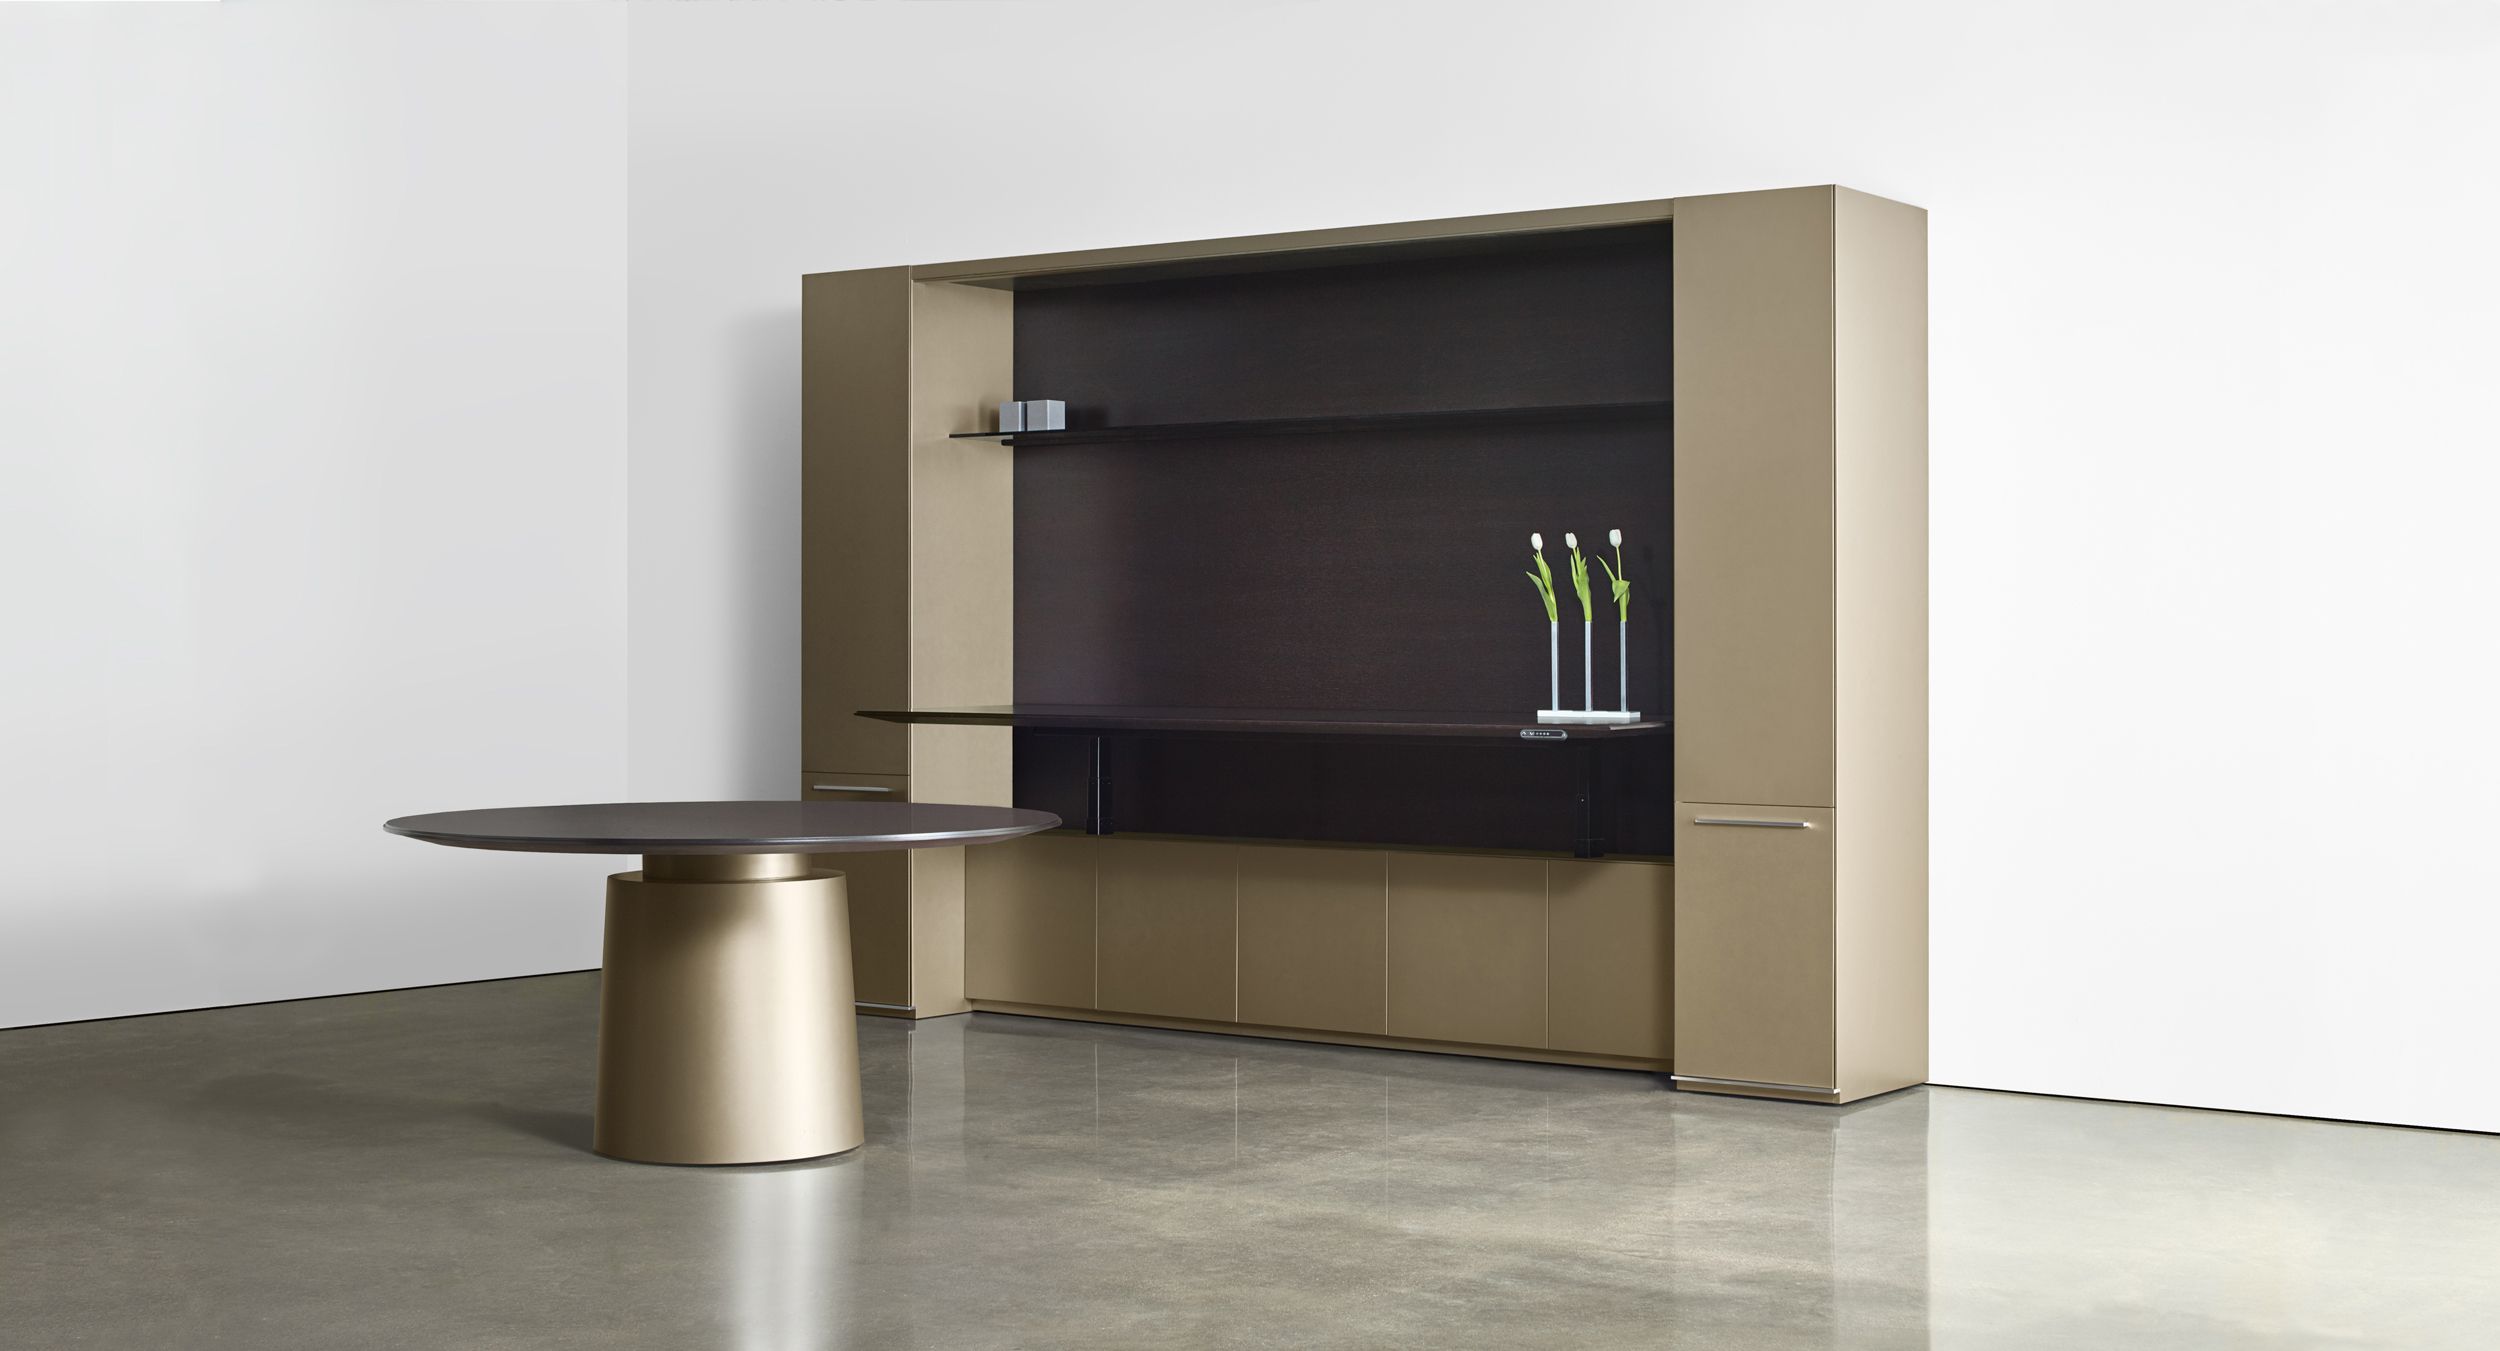 An integral adjustable-height surface demonstrates attention to detail and elegance in execution.